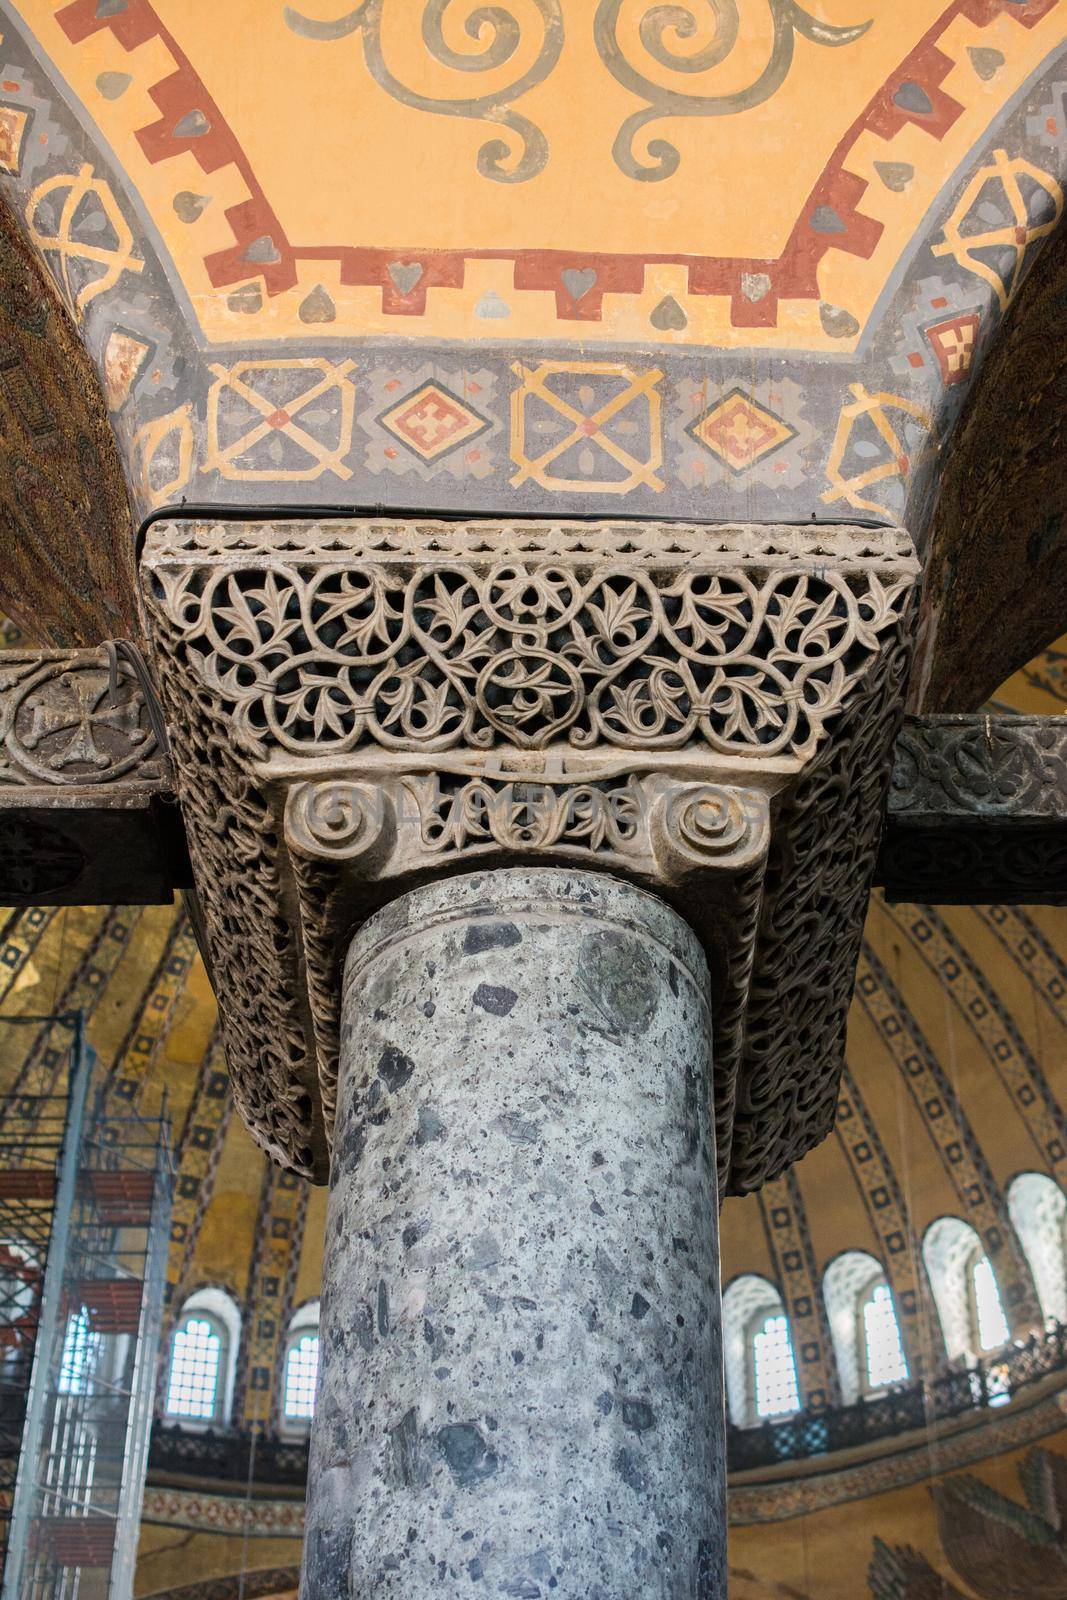 The Columns inside Hagia Sophia in the view